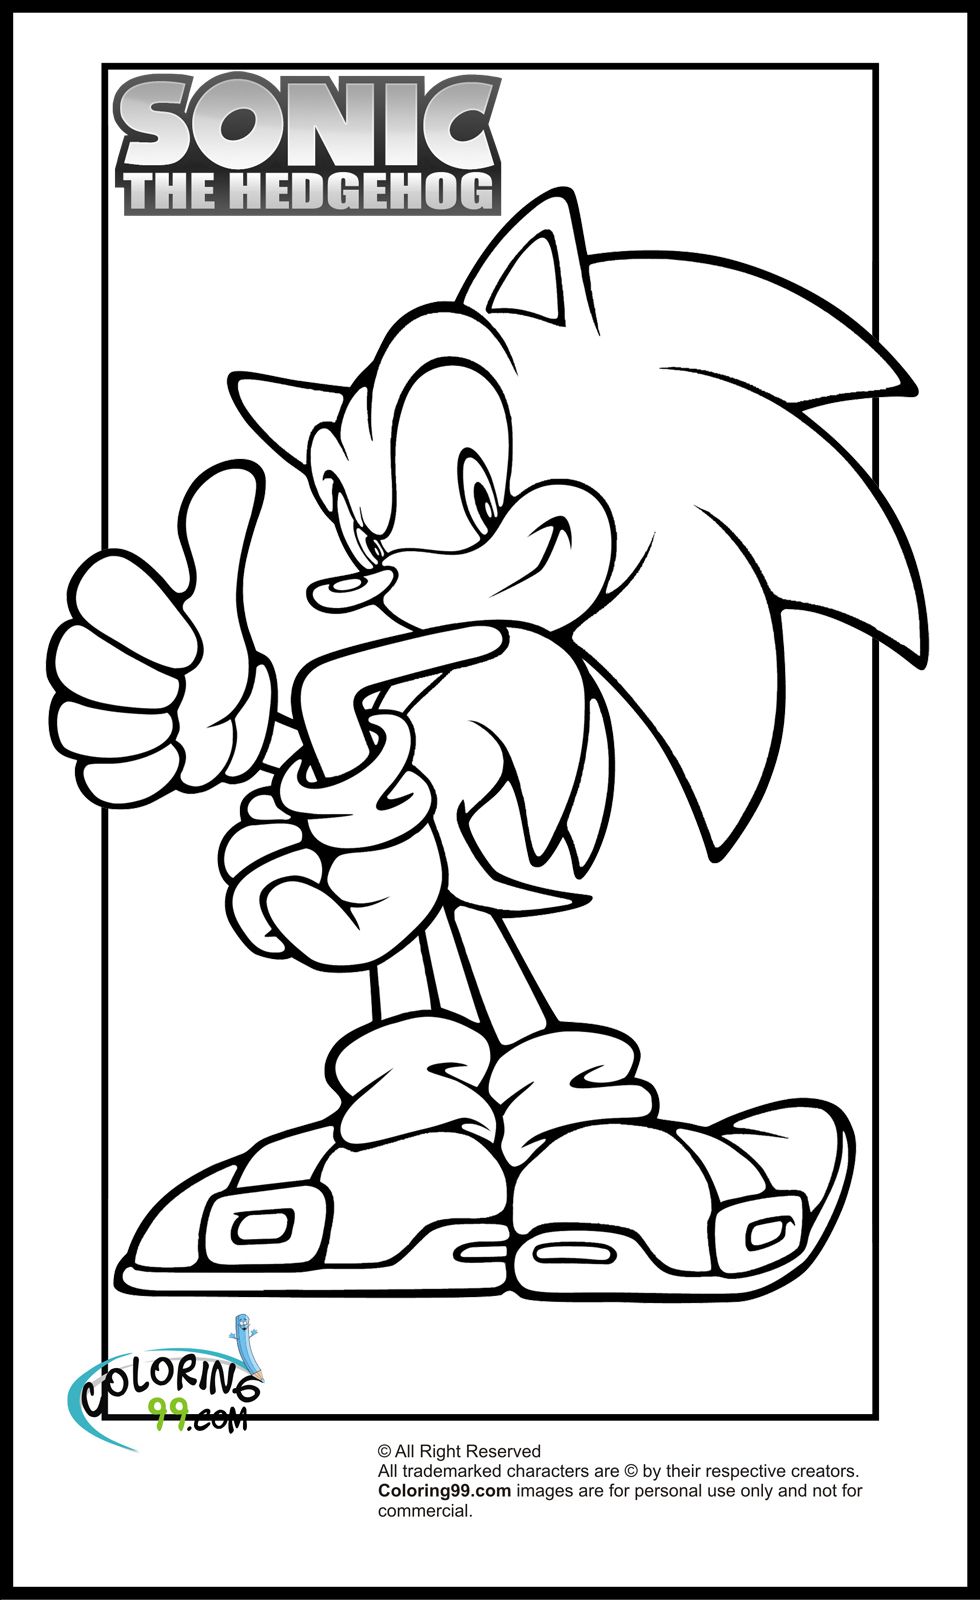 sonic-exe-coloring-pages-at-getcolorings-free-printable-colorings-pages-to-print-and-color